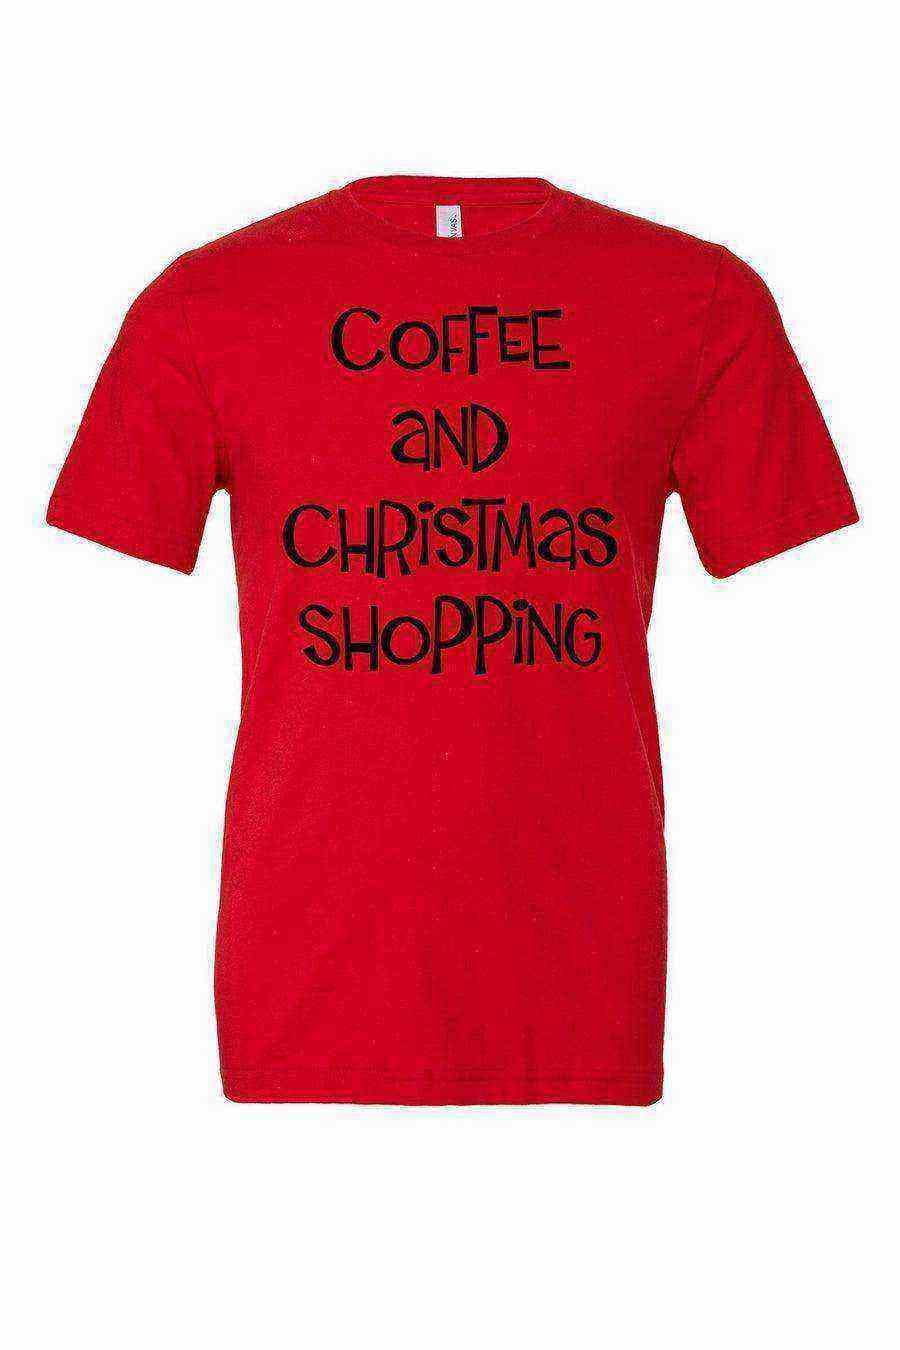 Womens | Coffee and Christmas Shopping Tee - Dylan's Tees